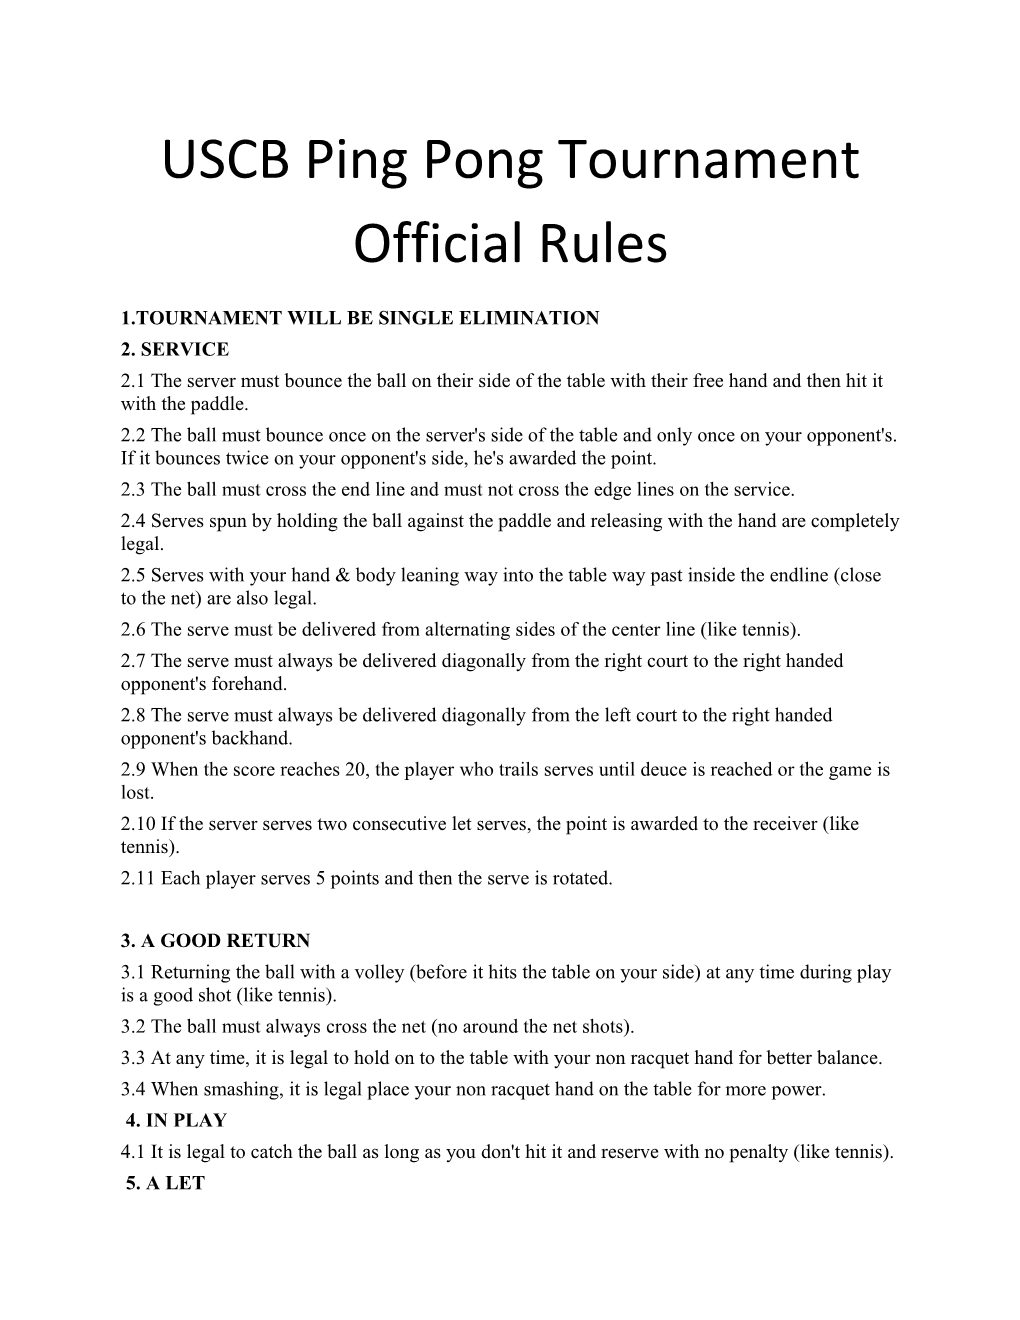 1.Tournament Will Be Single Elimination